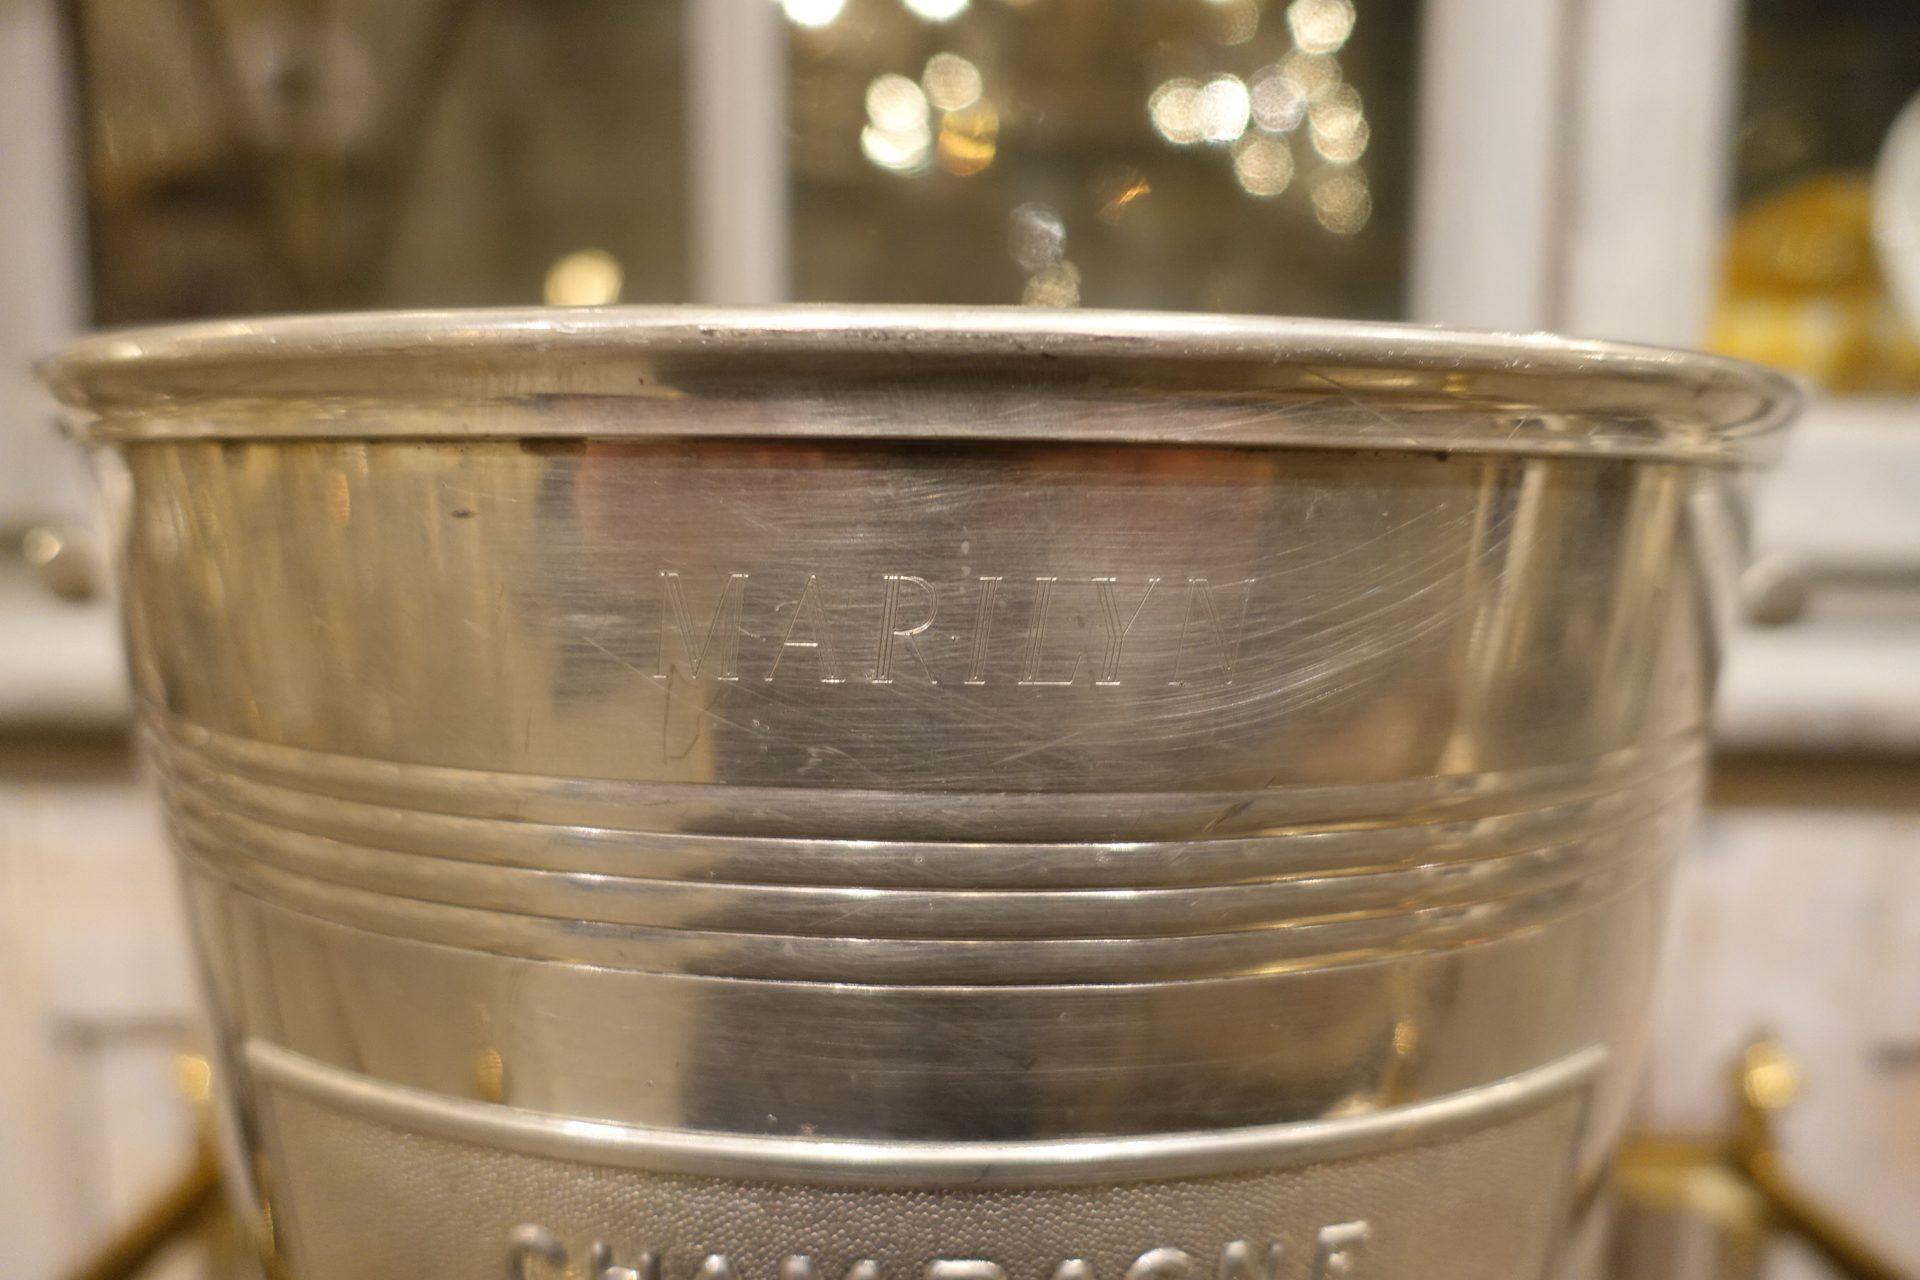 Huge and handsome magnum champagne cooler / bucket, from the house of Piper. Polished quality tin, with the Piper name as well as Marylin Monroe’s name and address on the sides! A lovely ornate bunch of grapes also decorates the side.

In 1953, the